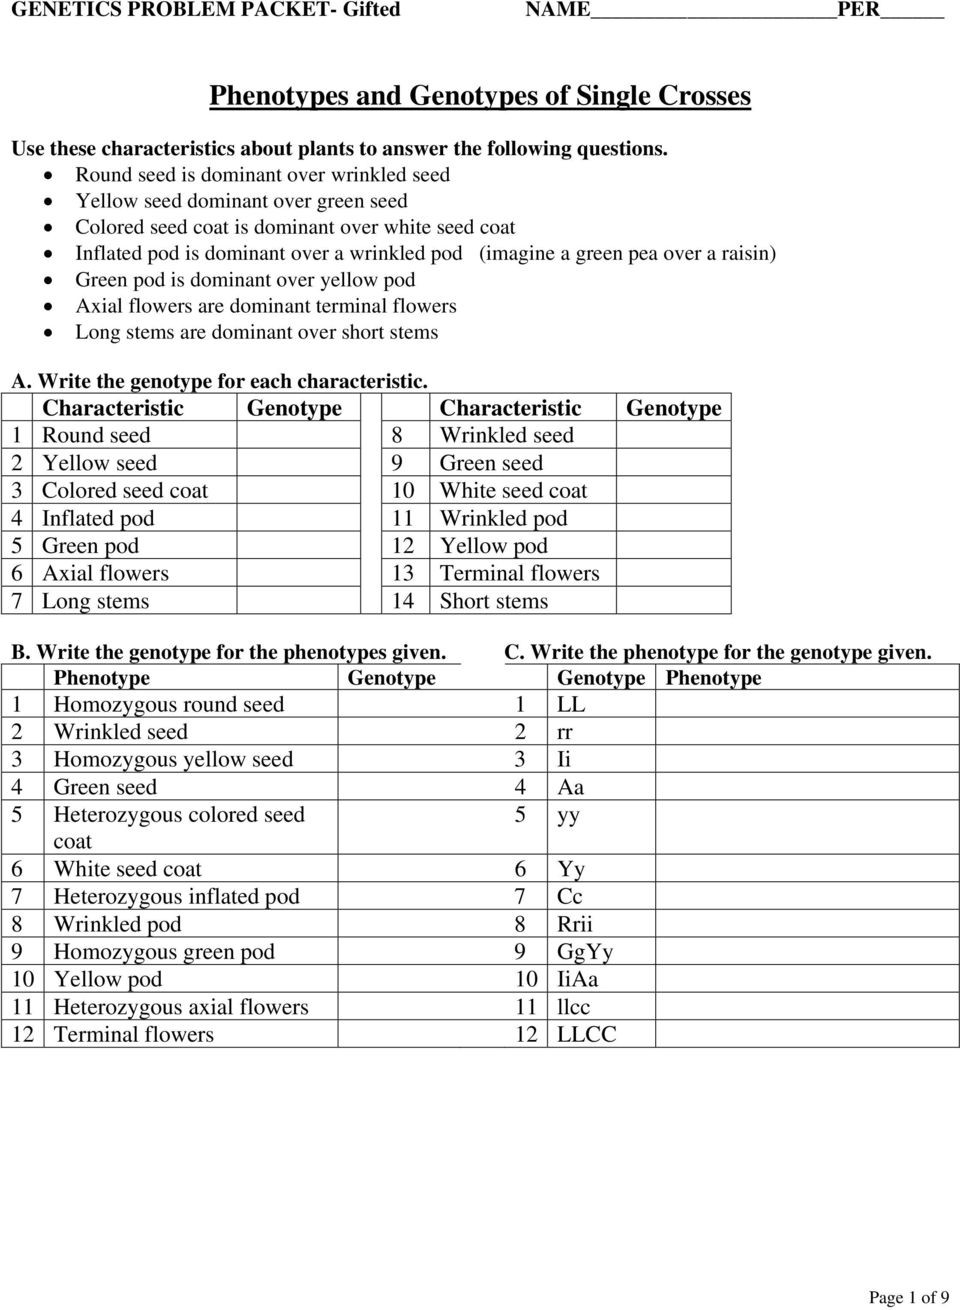 Genotypes and Phenotypes Worksheet Phenotypes and Genotypes Of Single Crosses Pdf Free Download